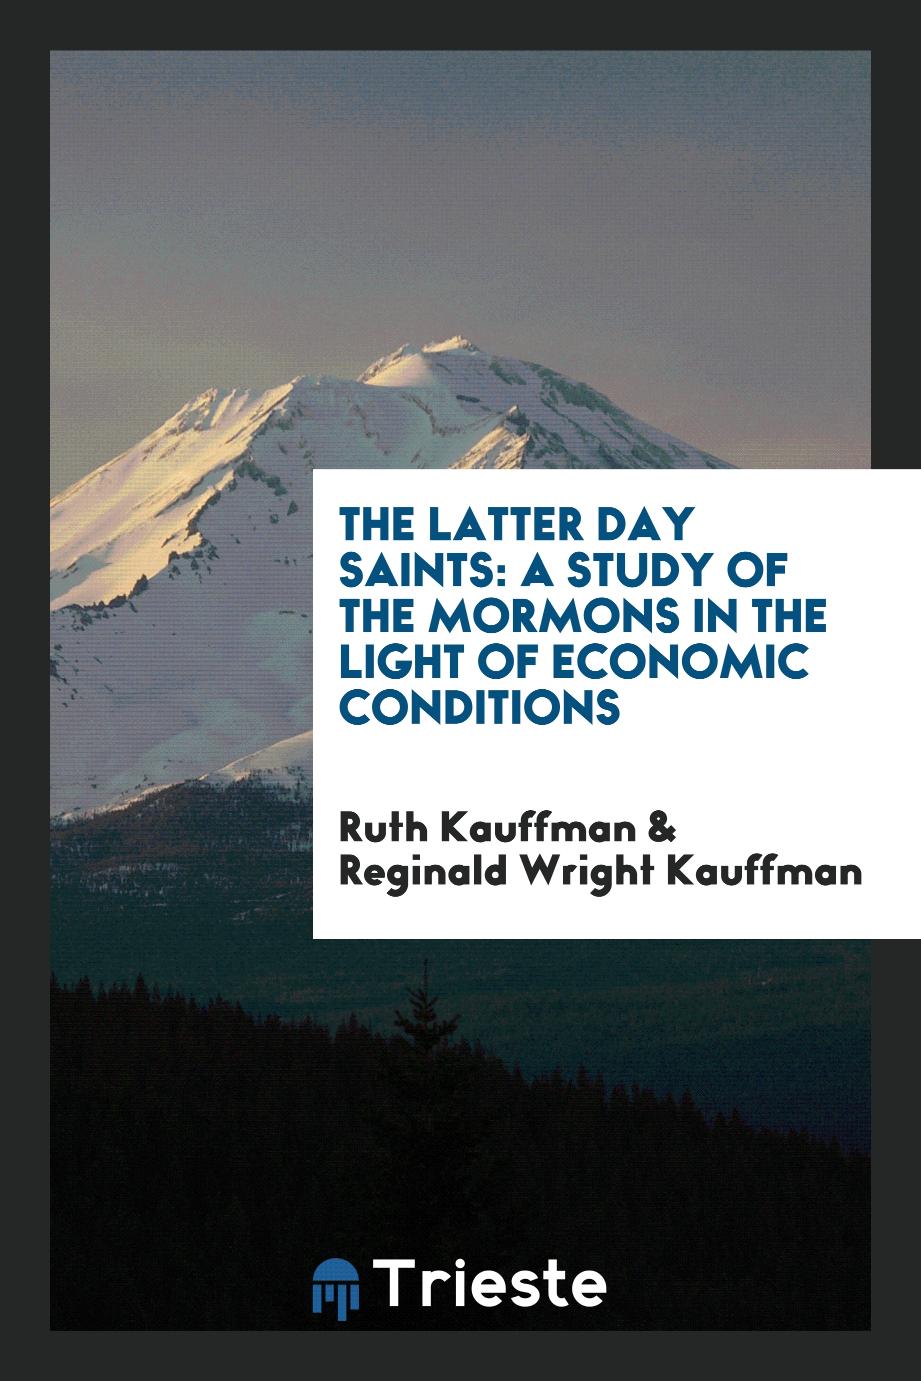 The Latter Day Saints: A Study of the Mormons in the Light of Economic Conditions